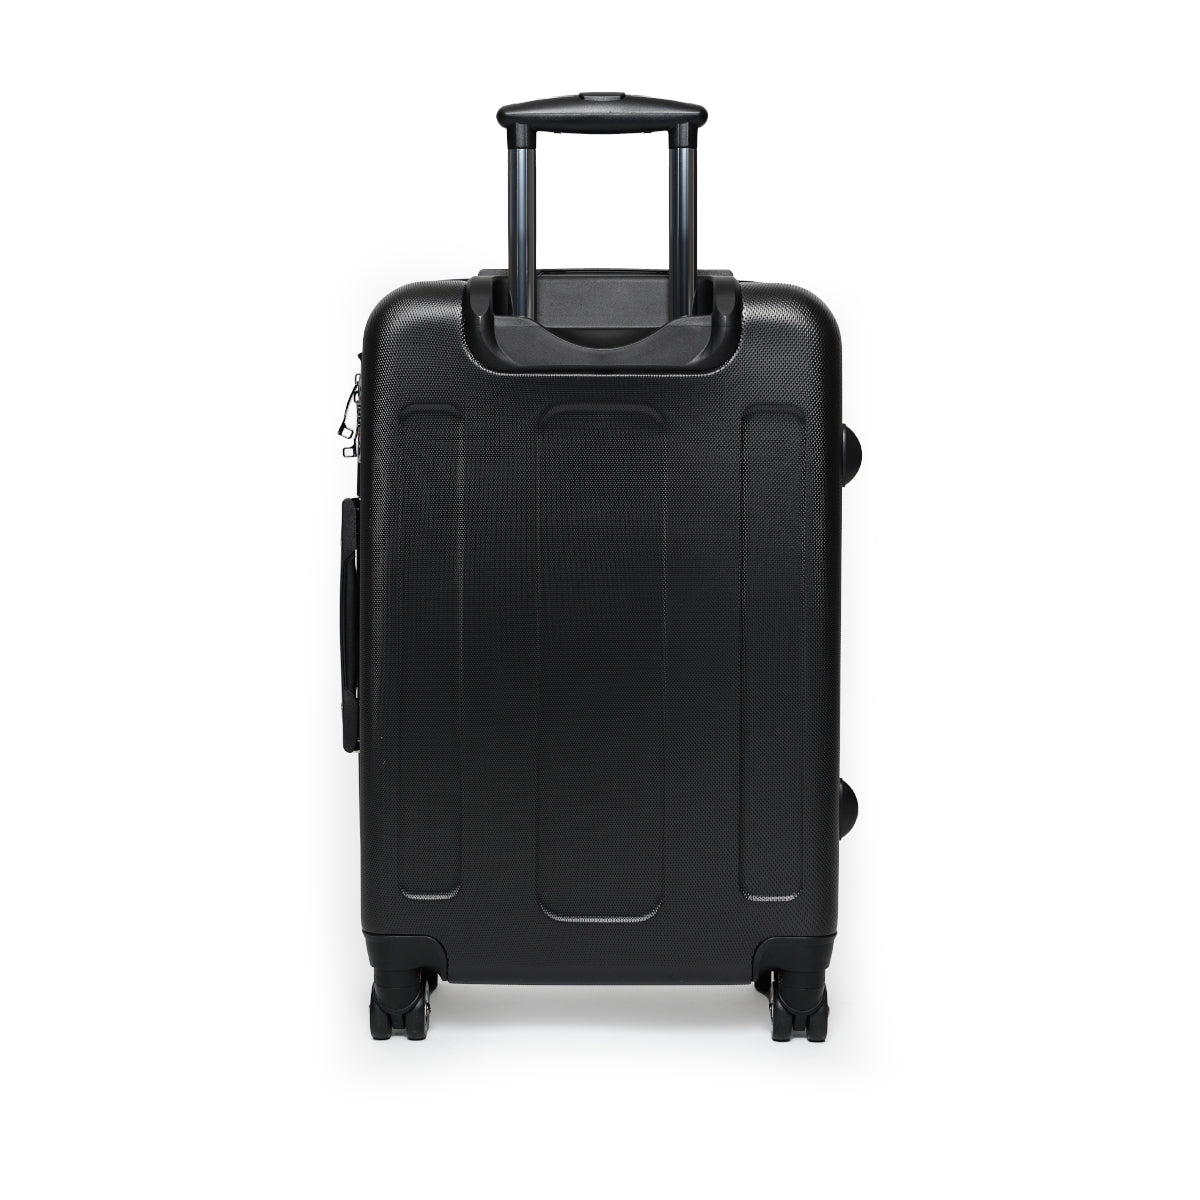 Getrott Carlos Santana Abraxas 1970 Black Cabin Suitcase Extended Storage Adjustable Telescopic Handle Double wheeled Polycarbonate Hard-shell Built-in Lock-Bags-Geotrott